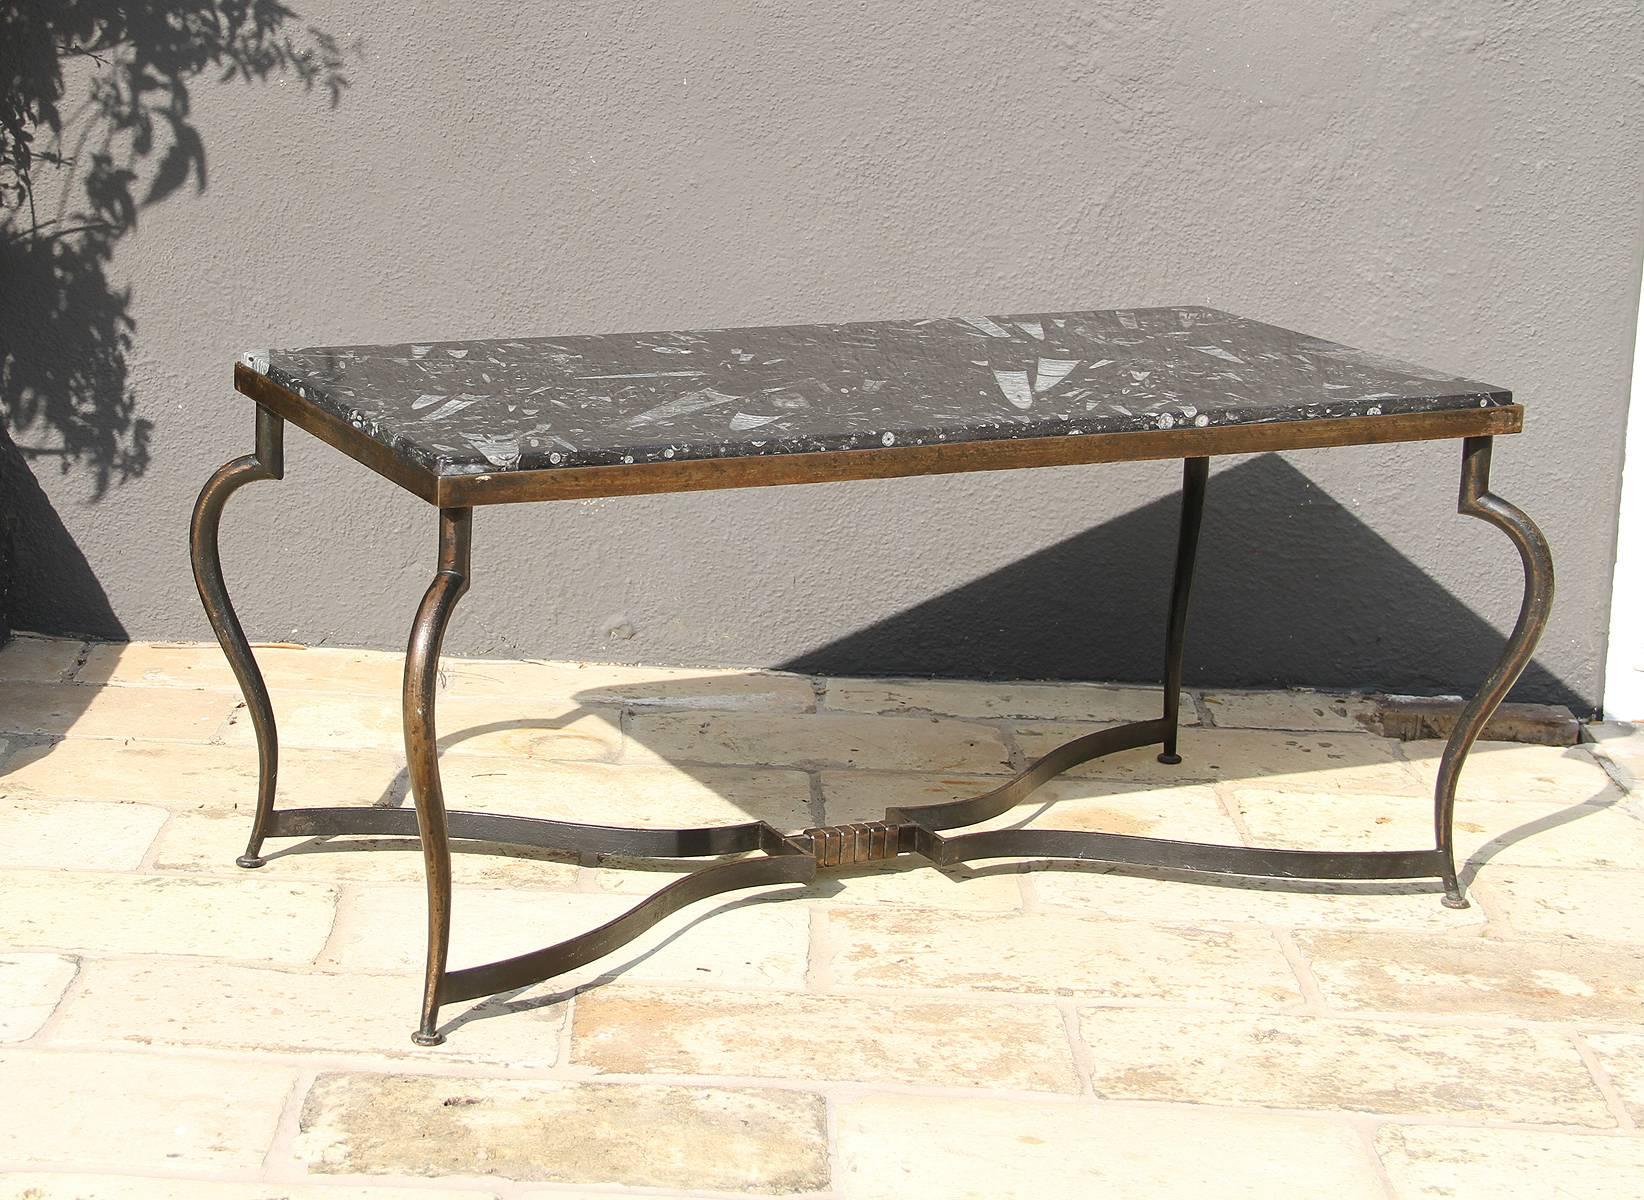 Michel Zadounaisky (1903-1983).

Very rare pair of 1930 Art Deco patinated wrought iron tables with a black fossils marble-tops.

An elegant and sophisticated model for a coffee table providing delicateness, simplicity, and class to any interior